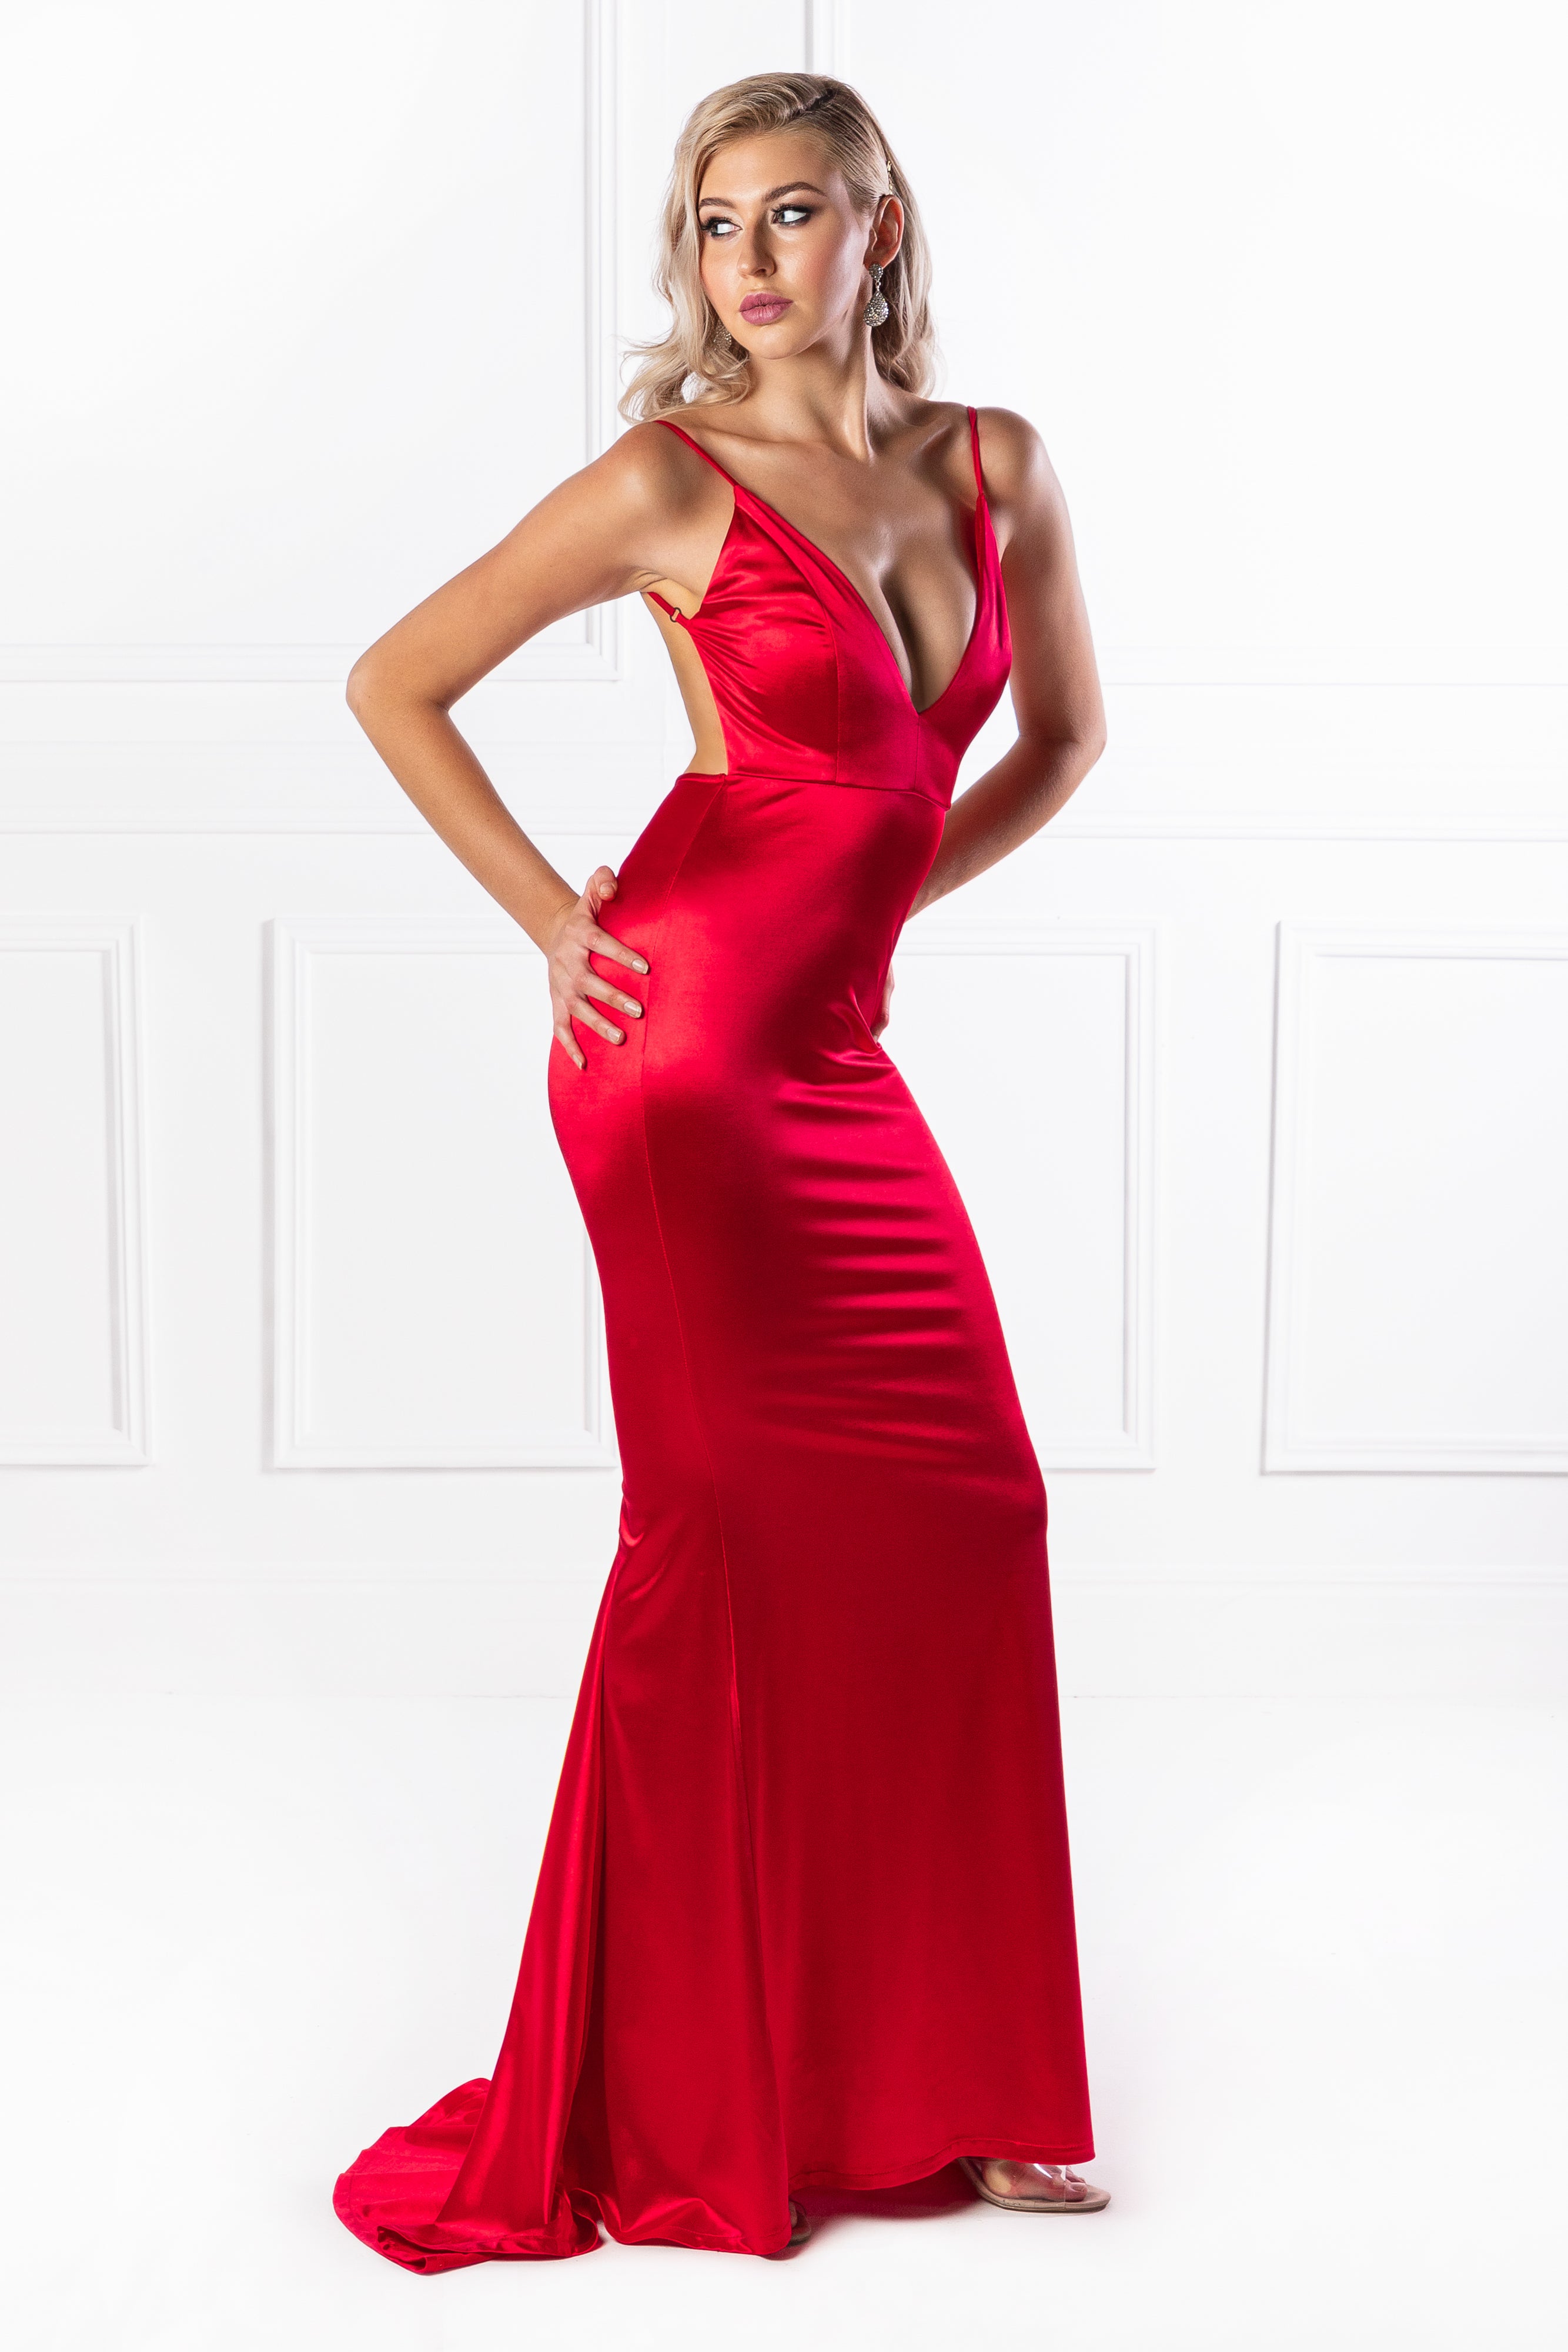 Honey Couture MILEE Metallic Red Low Back Mermaid Evening Gown Dress {vendor} AfterPay Humm ZipPay LayBuy Sezzle